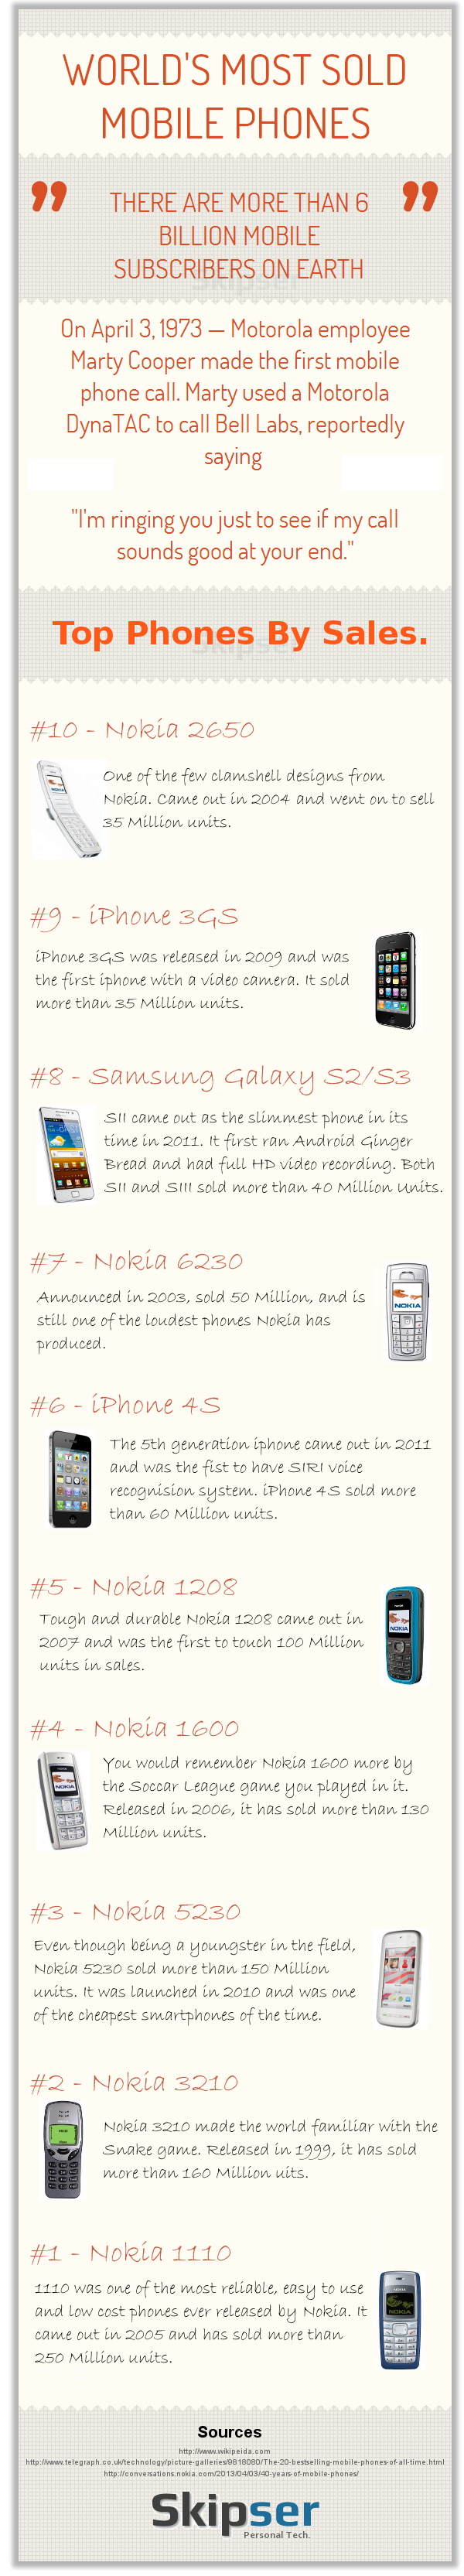 Worlds 10 most sold mobile phones.